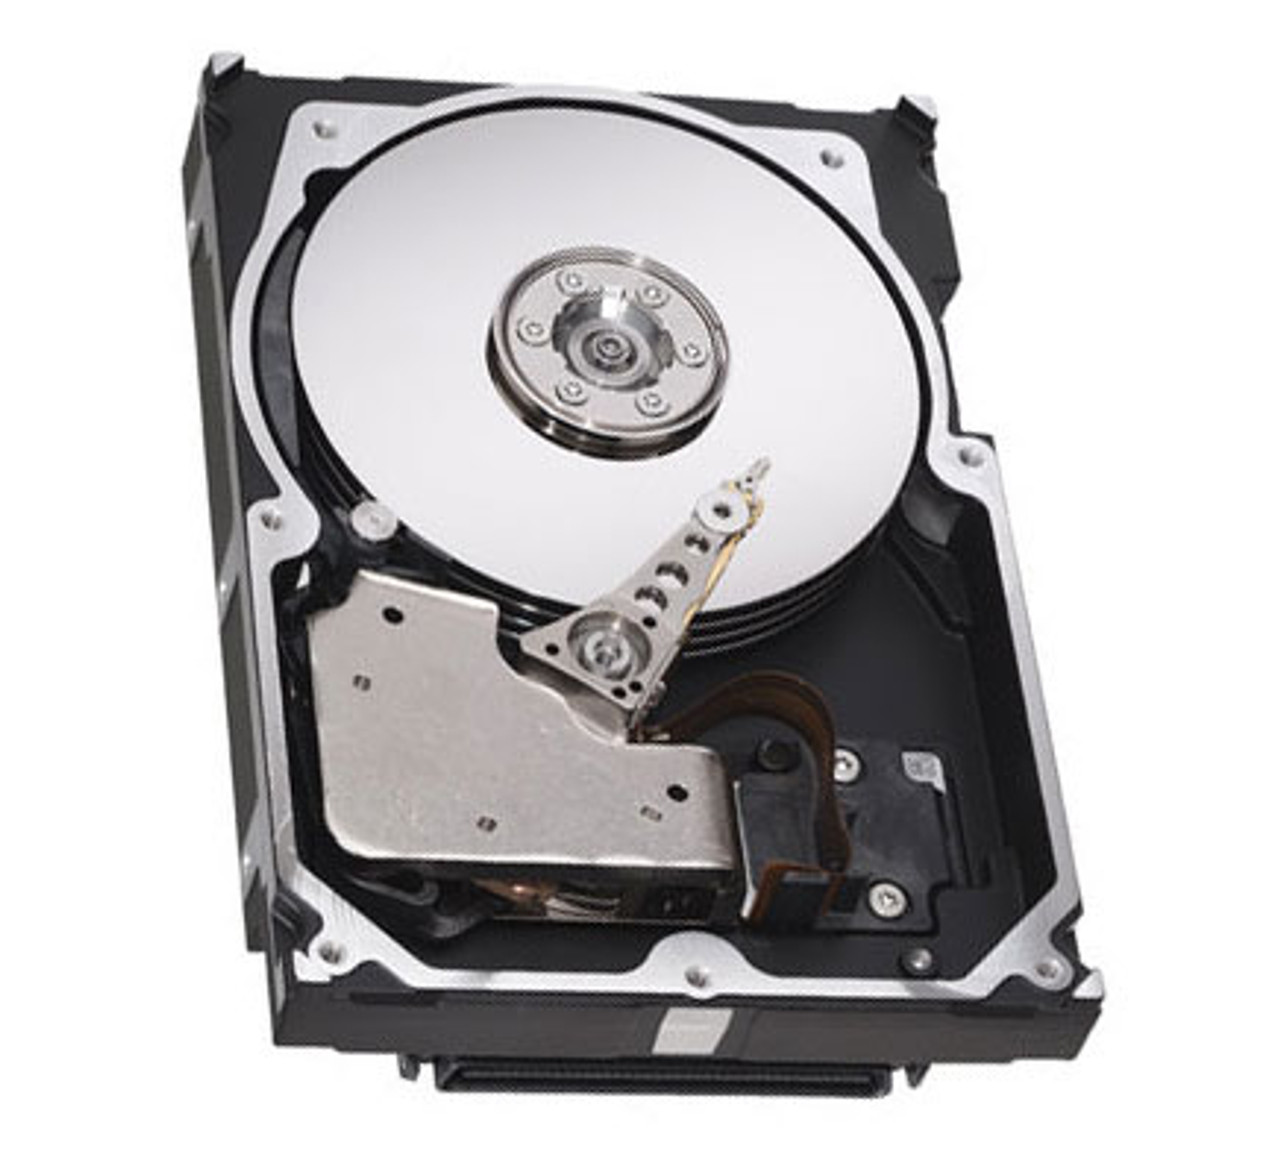 1R179-U Dell 36GB 10000RPM Ultra-320 SCSI 80-Pin Hot Swap 8MB Cache 3.5-inch Internal Hard Drive with Tray